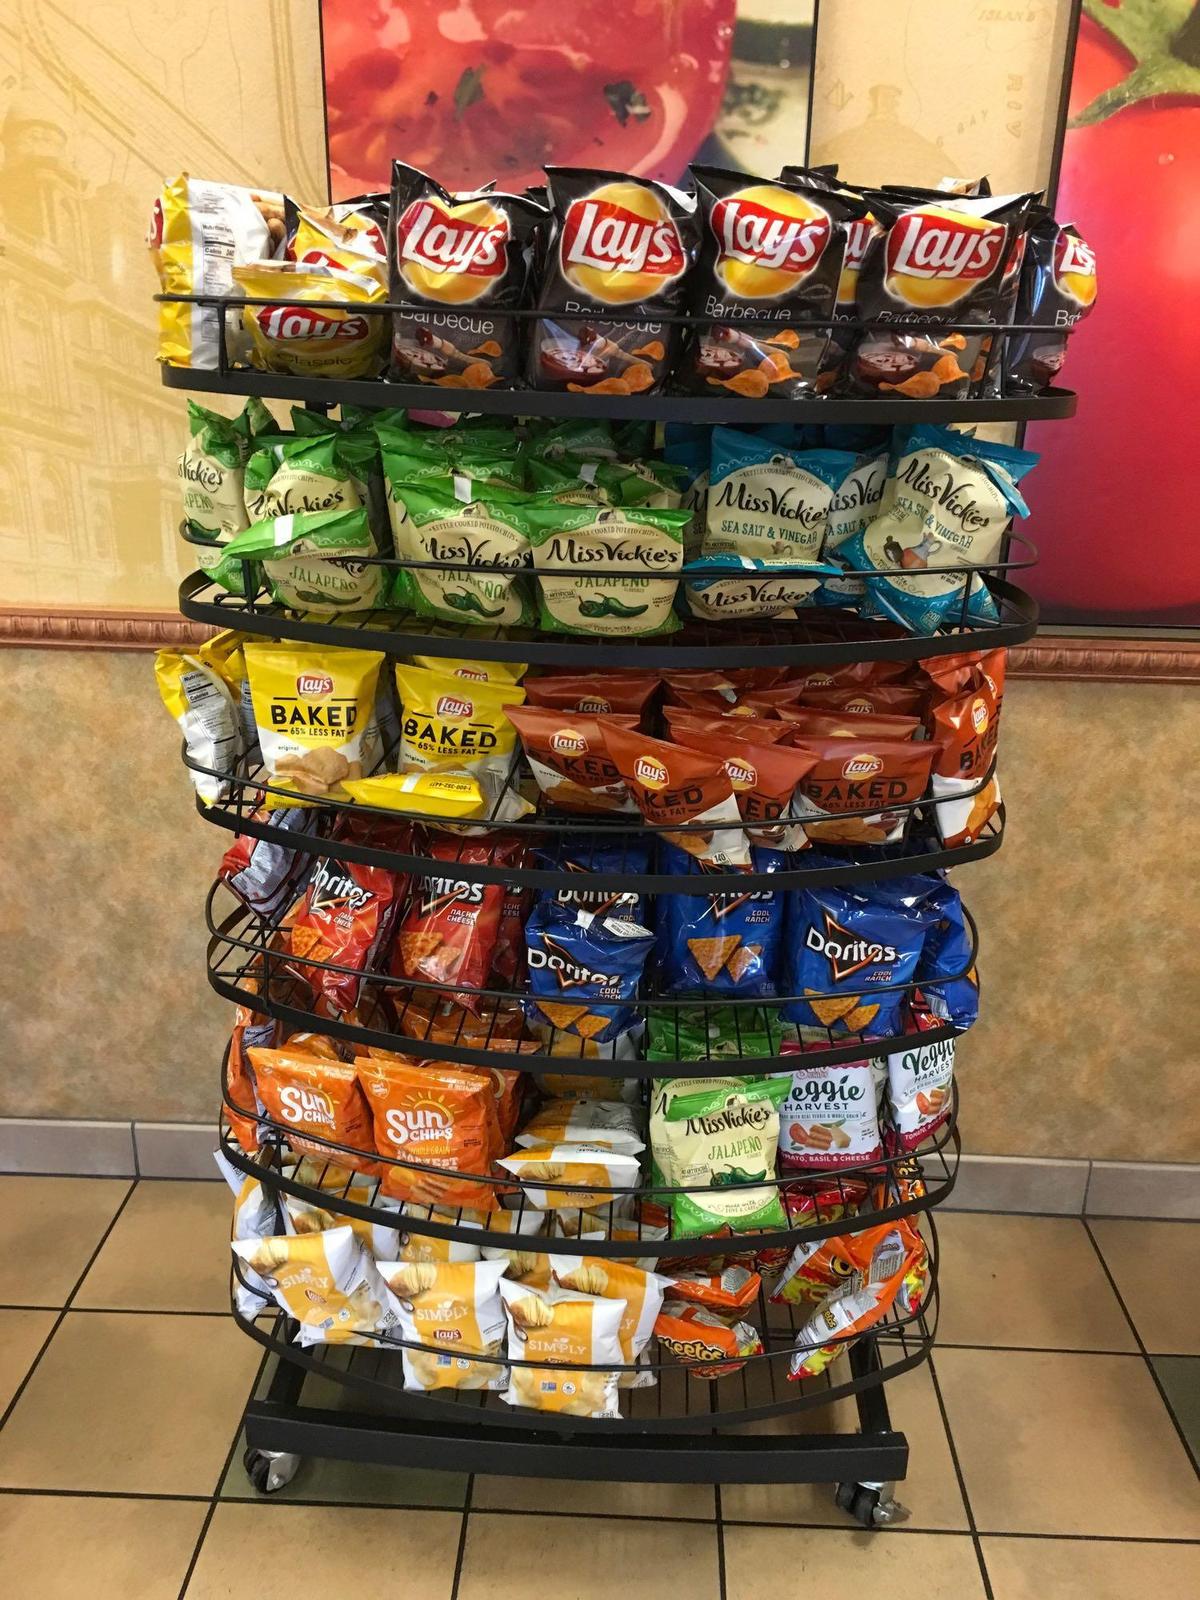 6 tier rolling display rack. Does not include potato chips